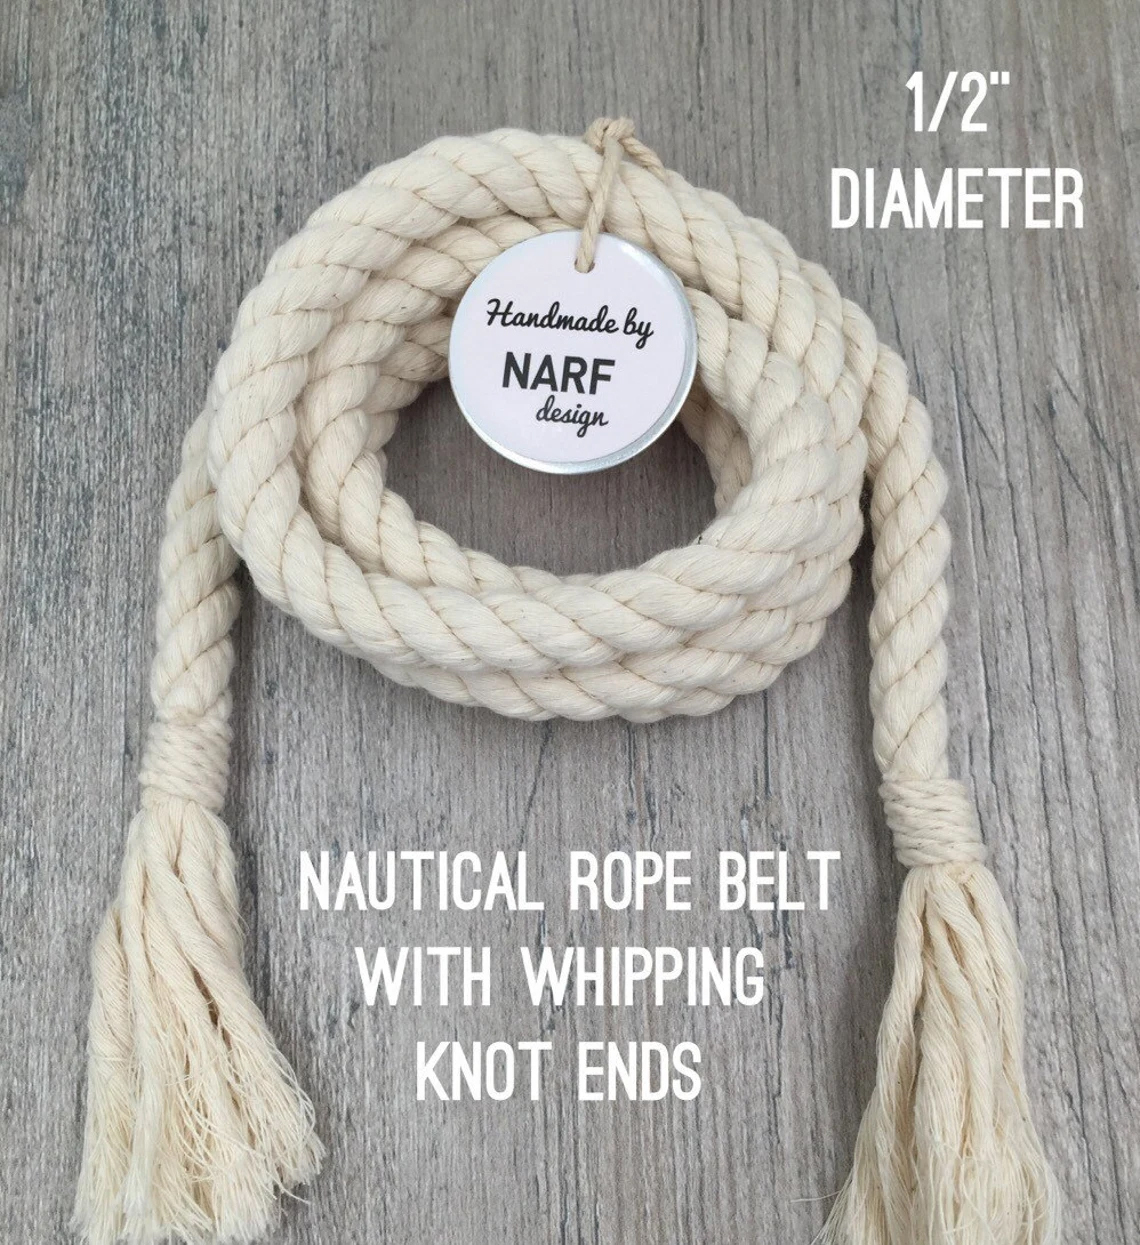 Knot On Rope Belt Over Old Stock Photo 337682627